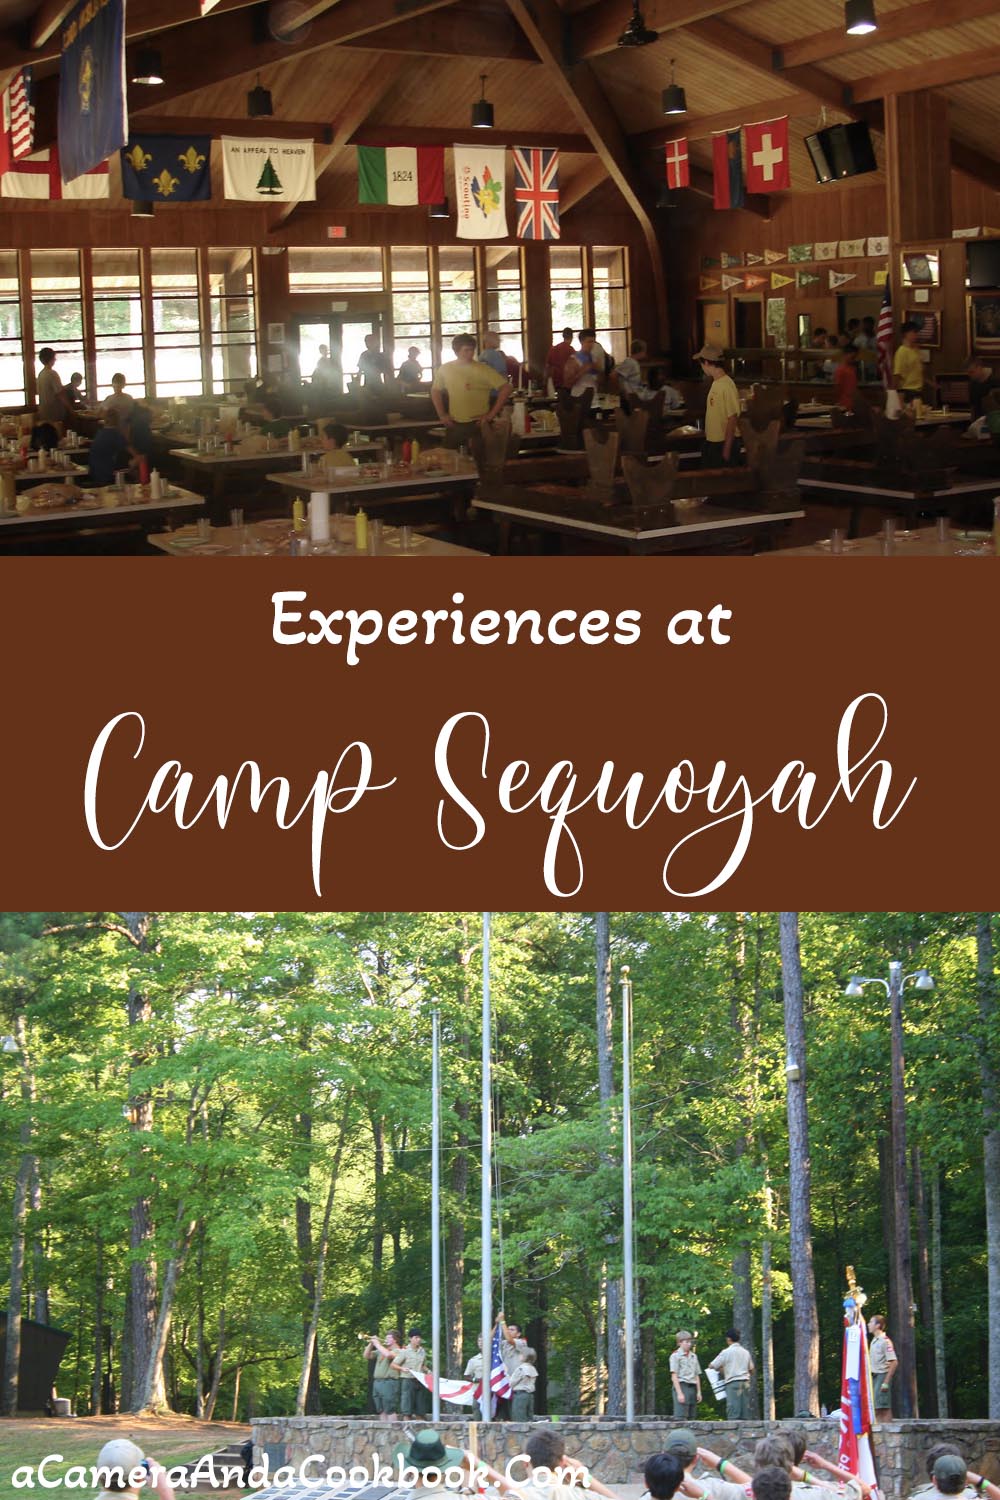 Camp Sequoyah Experiences: Read about experiences had at an amazing Boy Scouts of America located about 80 miles east of Birmingham, Al called Camp Sequoyah. 
-A Camera & A Cookbook-
#boyscouts #summercamp #scoutcamp
-A Camera & A Cookbook-